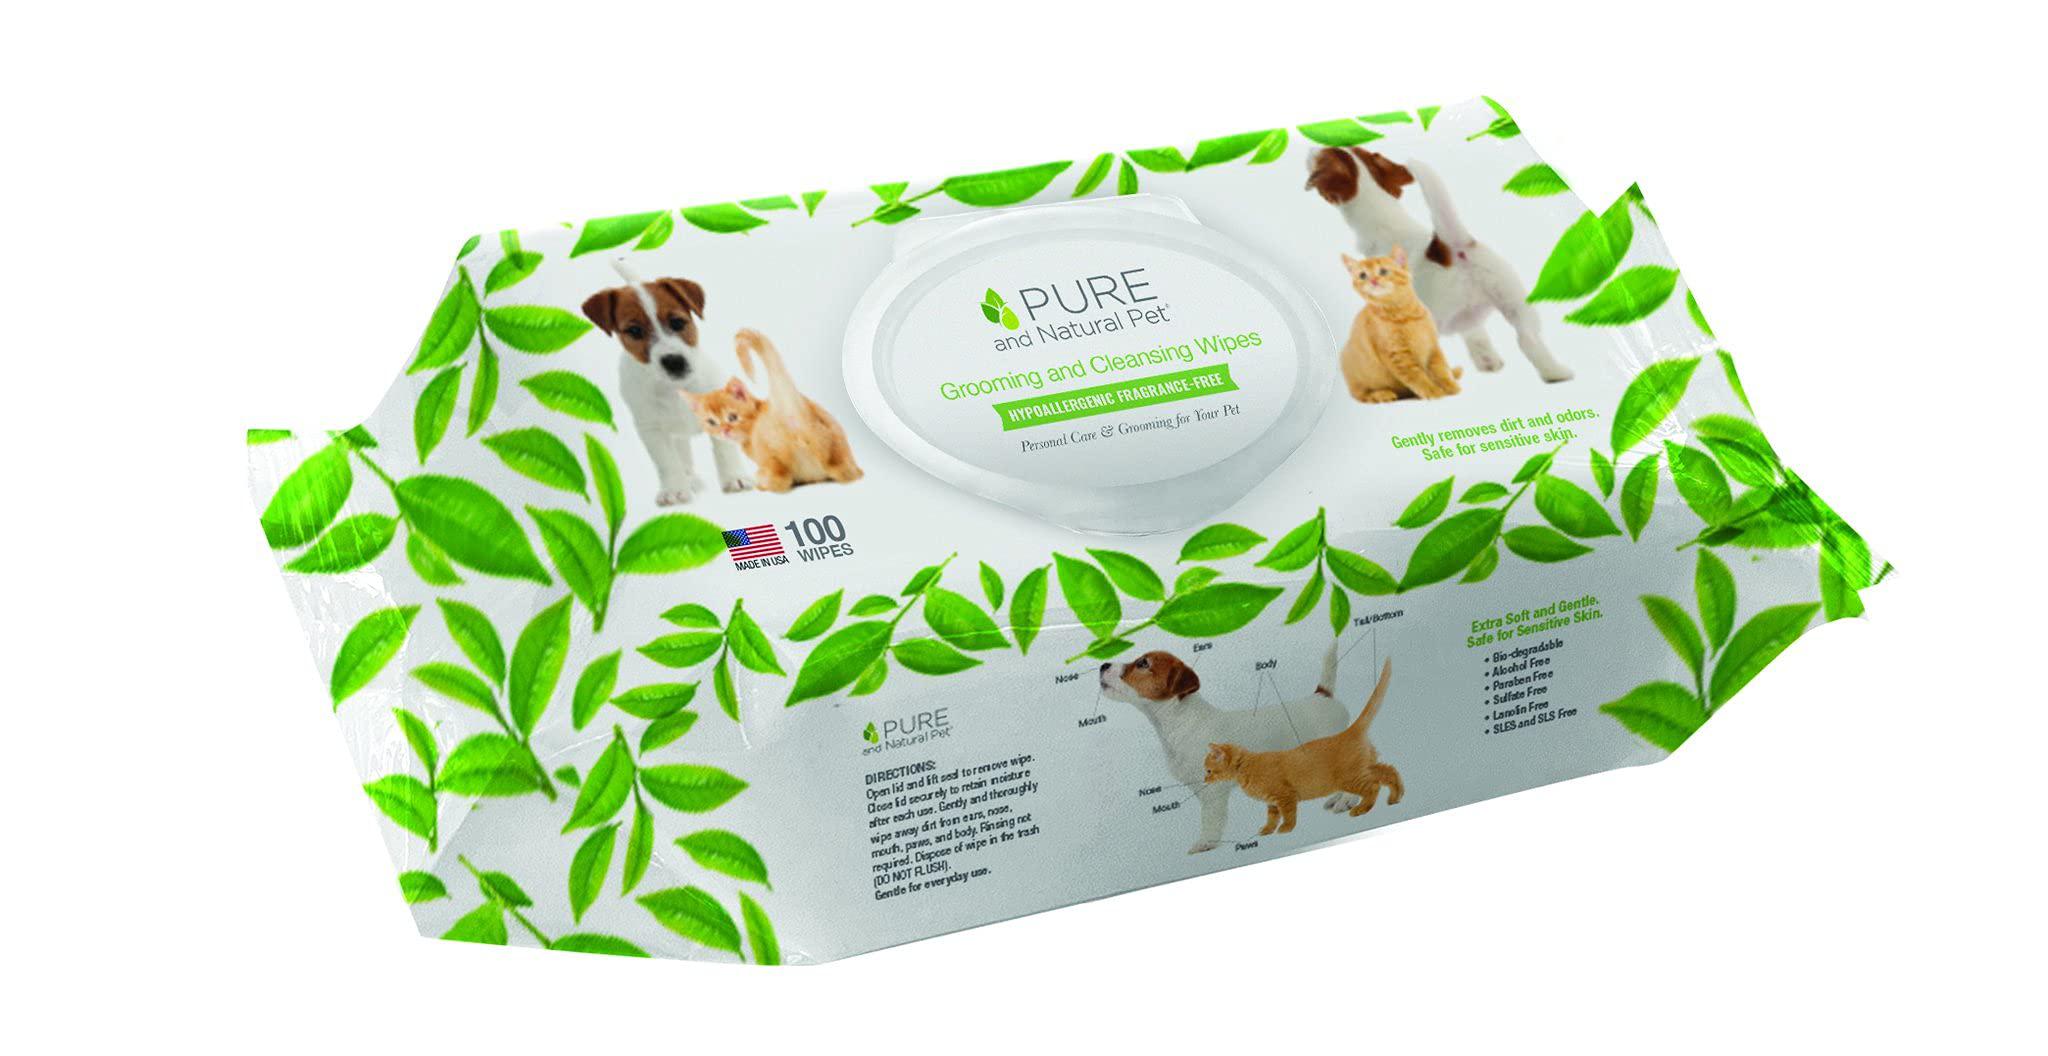 pure and natural pet grooming and cleansing wipes for all pets (unscented) 100 ct.